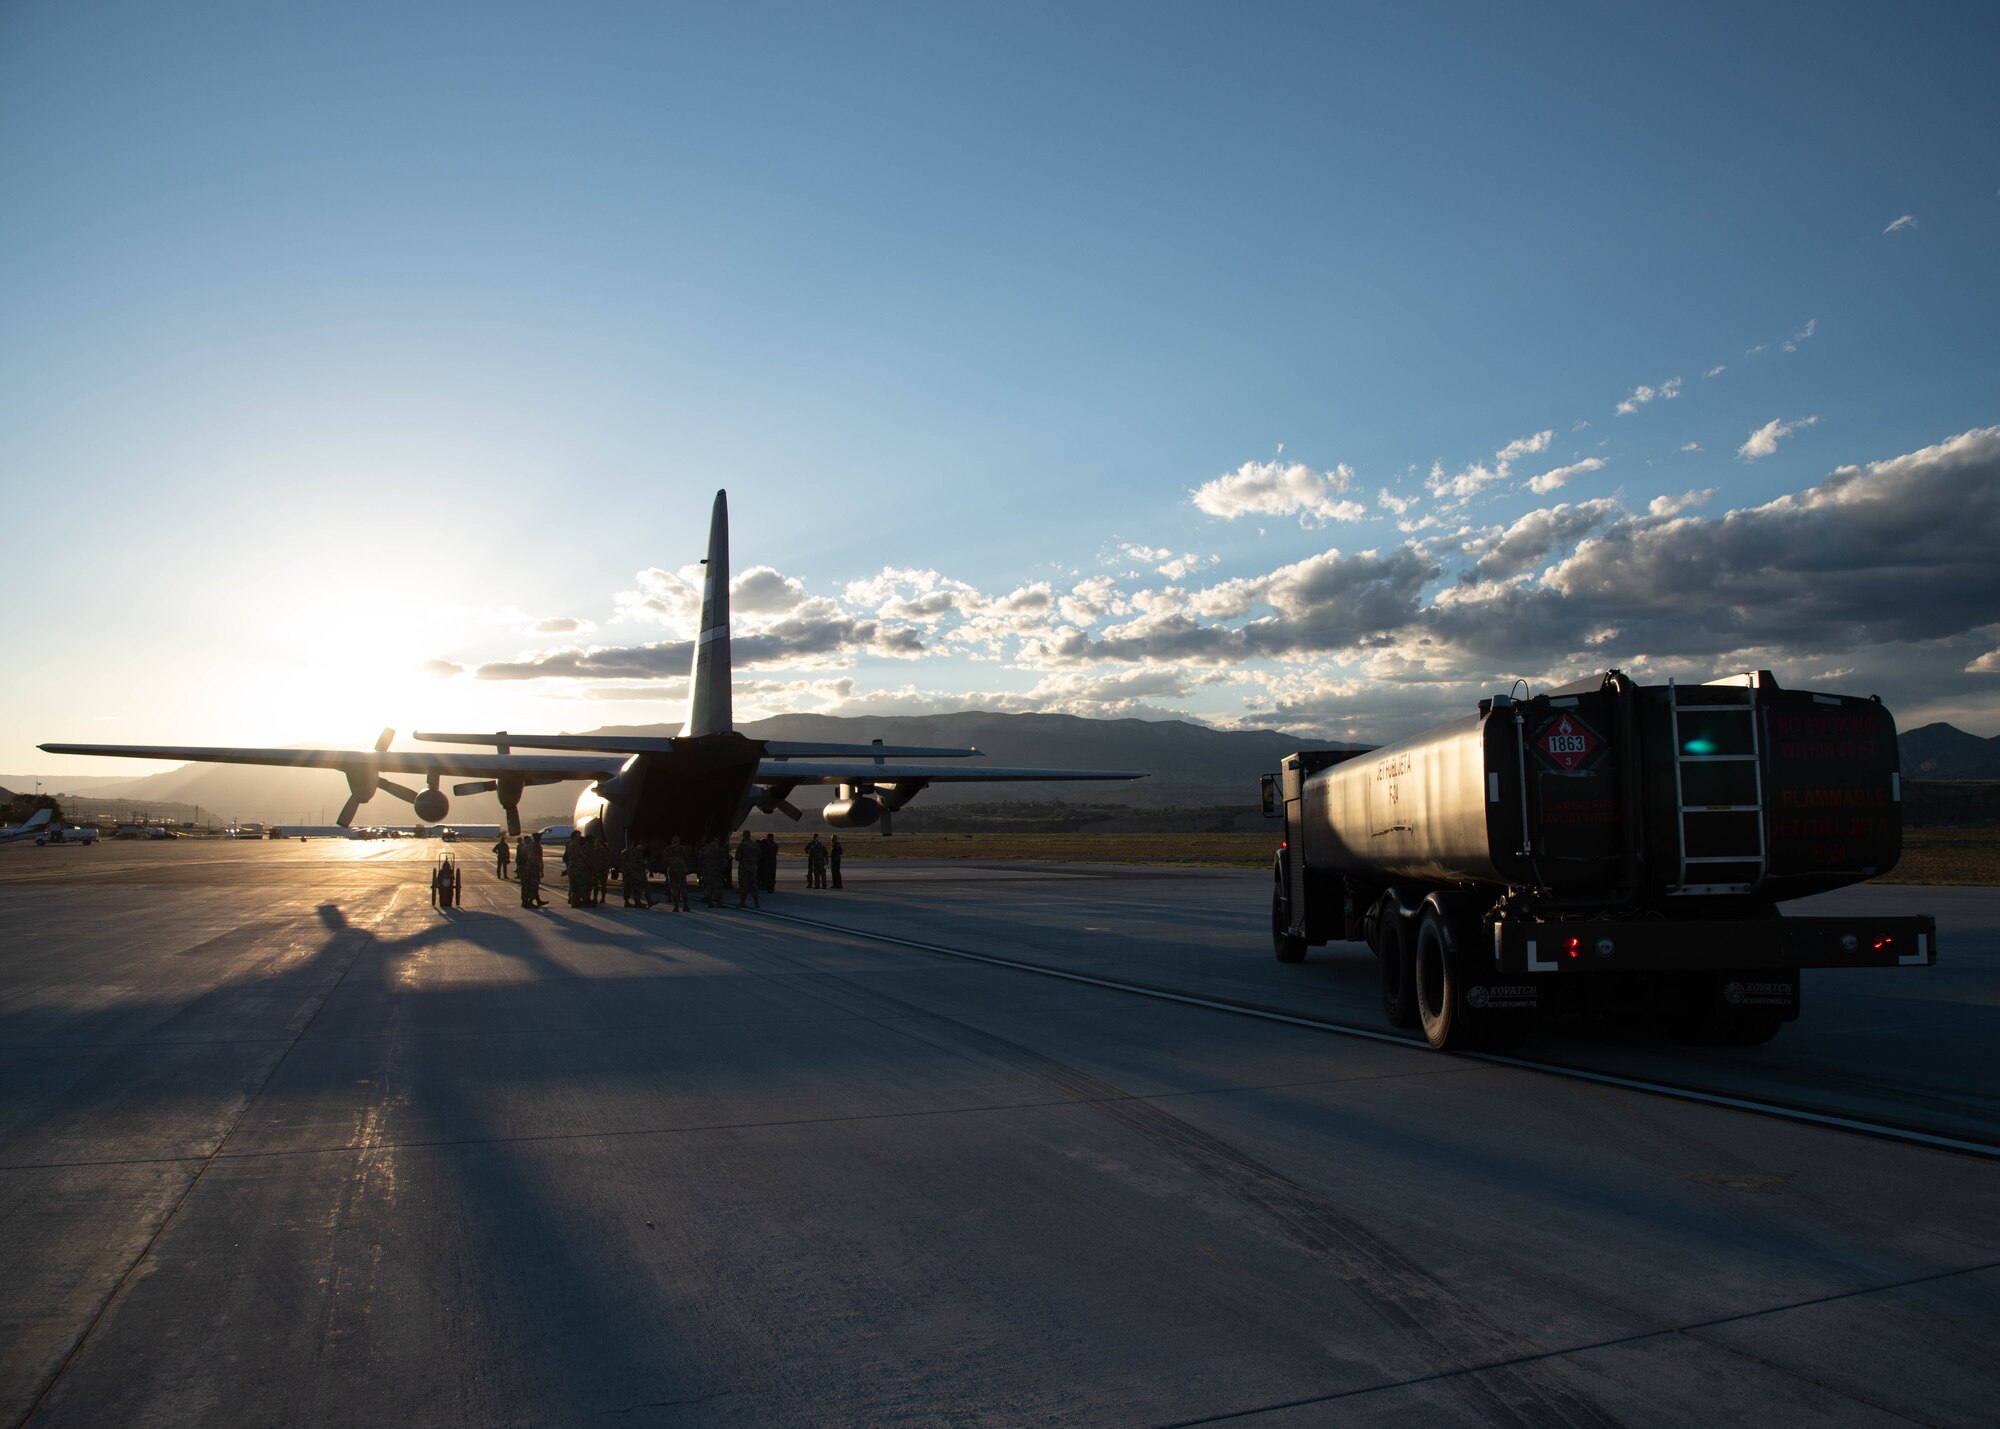 Active-duty Air Force, Air National Guard and Reserve Citizen Airmen who are fuel technicians and work in Logistics Readiness Squadrons, train on wet-wing defueling to offload fuel from a C-130J Super Hercules from the 403rd Wing, Keesler Air Force Base, Mississippi, Sept. 15, 2021, to a refueler truck. The Airmen gathered at Rifle-Garfield County Airport, Rifle, Colorado to take part in the 22nd Air Force’s flagship exercise Rally in the Rockies Sept. 12-17, 2021. The exercise is designed to develop Airmen for combat operations by challenging them with realistic scenarios that support a full spectrum of operations during military actions, operations or hostile environments.